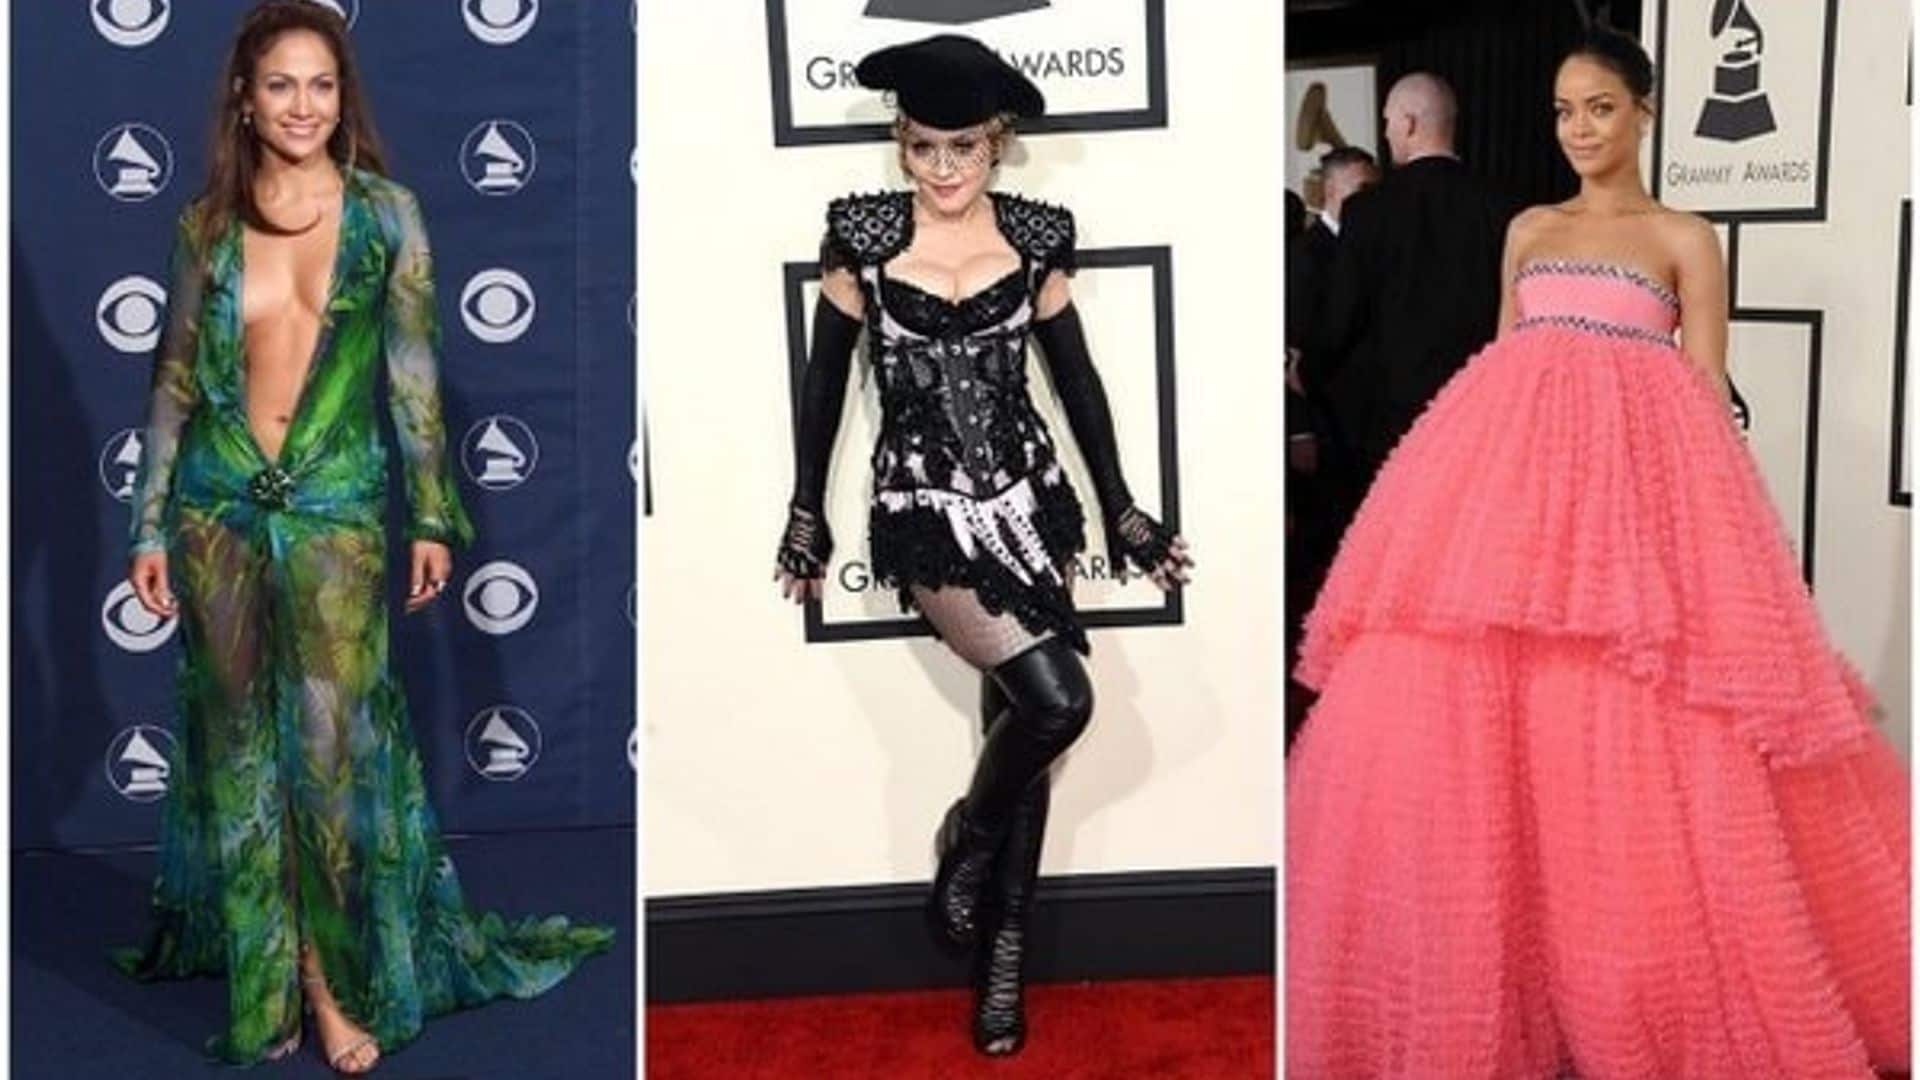 If there's one rule for style-watching on the Grammys red carpet, it's to expect the unexpected! In the countdown to the 60th Grammy Awards that will be taking place in NYC on Sunday, January 28, here's our roundup of the coolest, craziest and most memorable outfits seen at the annual music extravaganza.
<br>
Photos: Getty Images